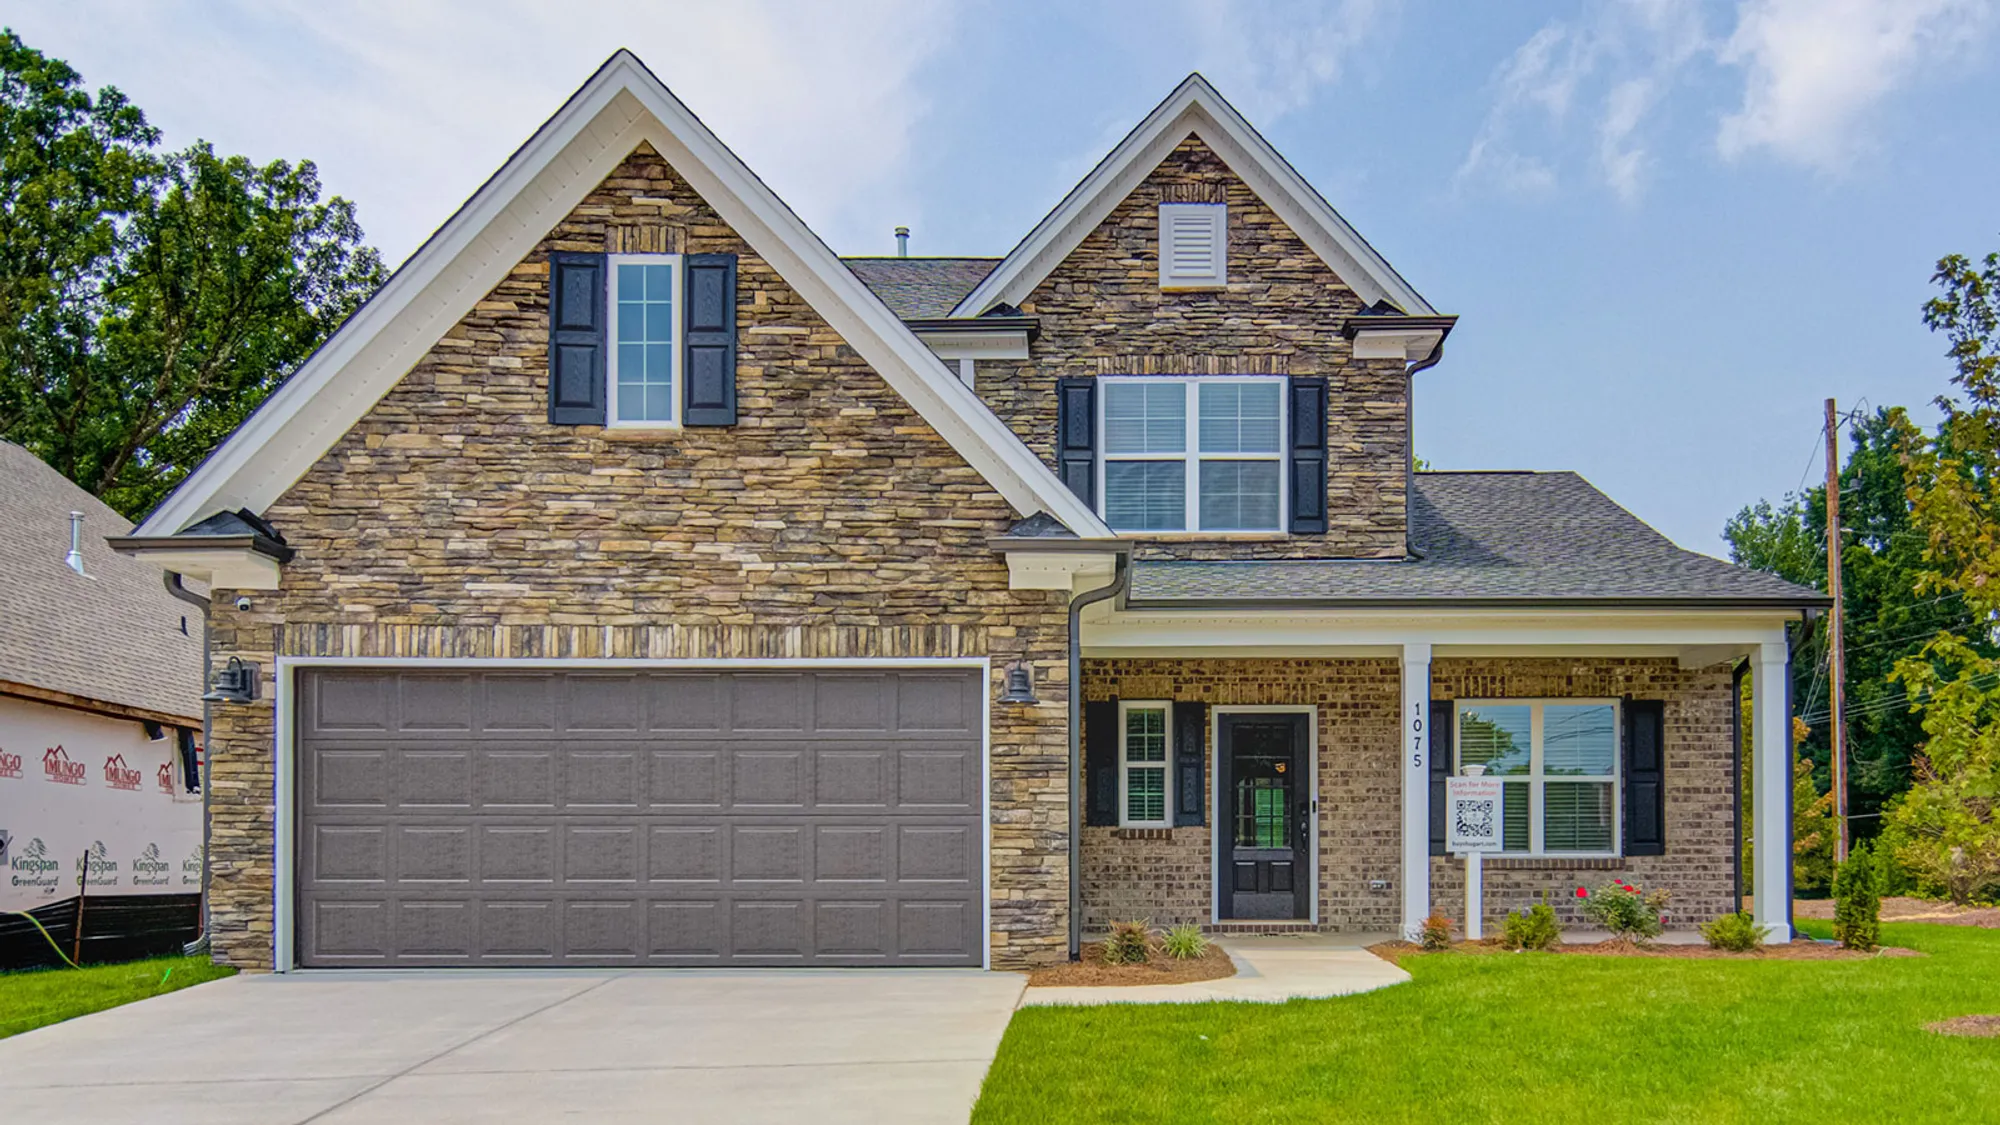 New home for sale in Lewisville NC with stone exterior